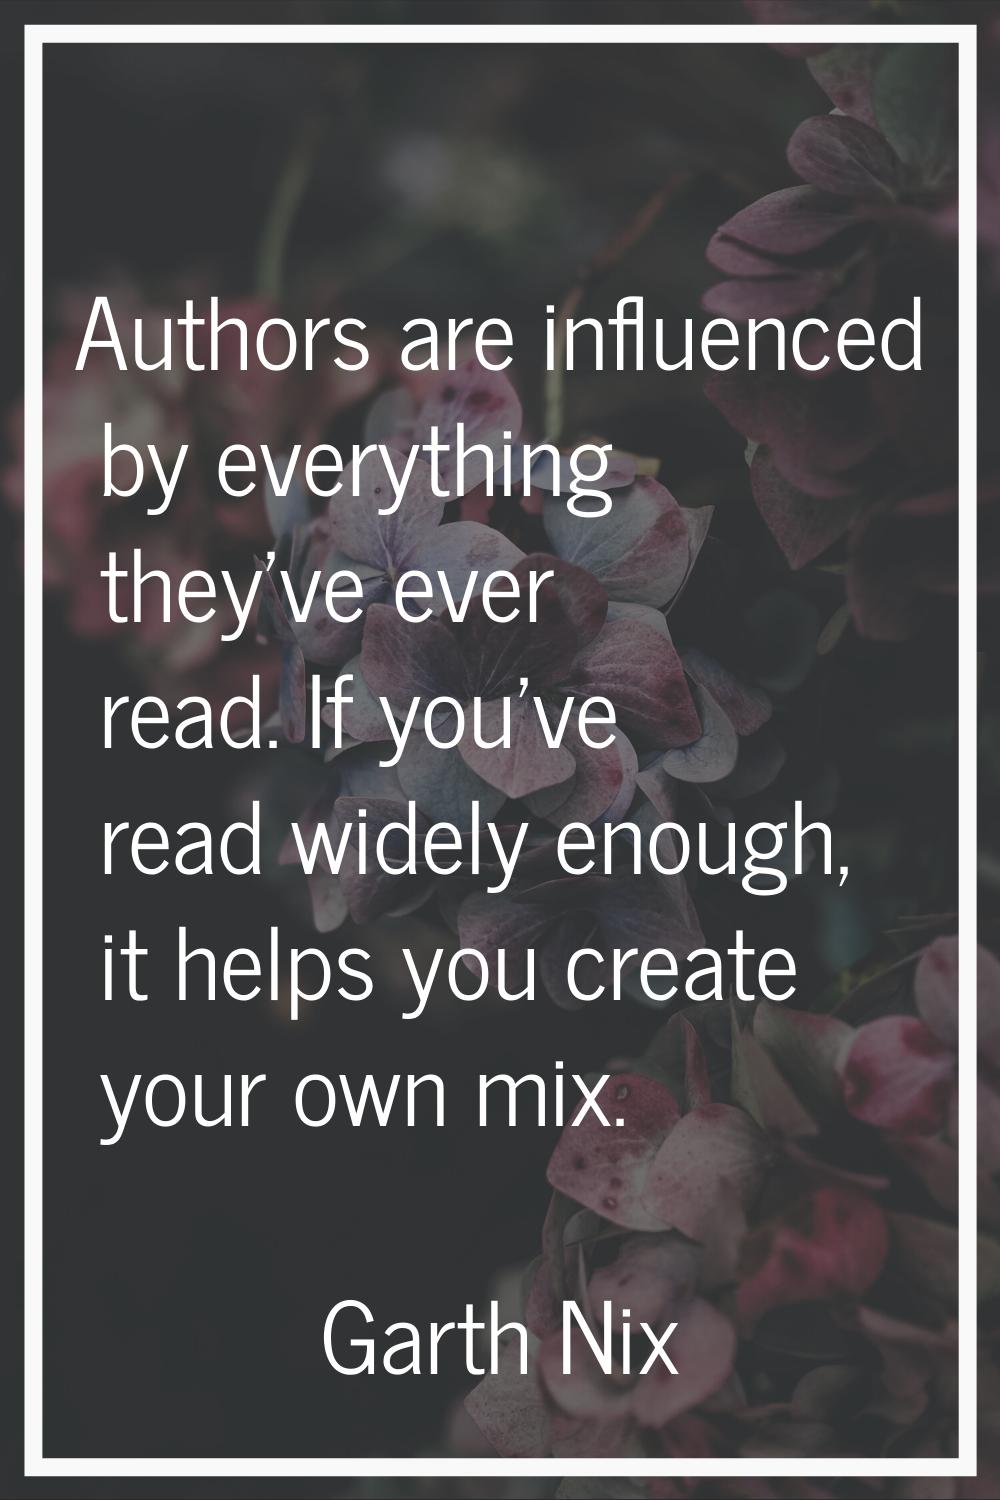 Authors are influenced by everything they've ever read. If you've read widely enough, it helps you 